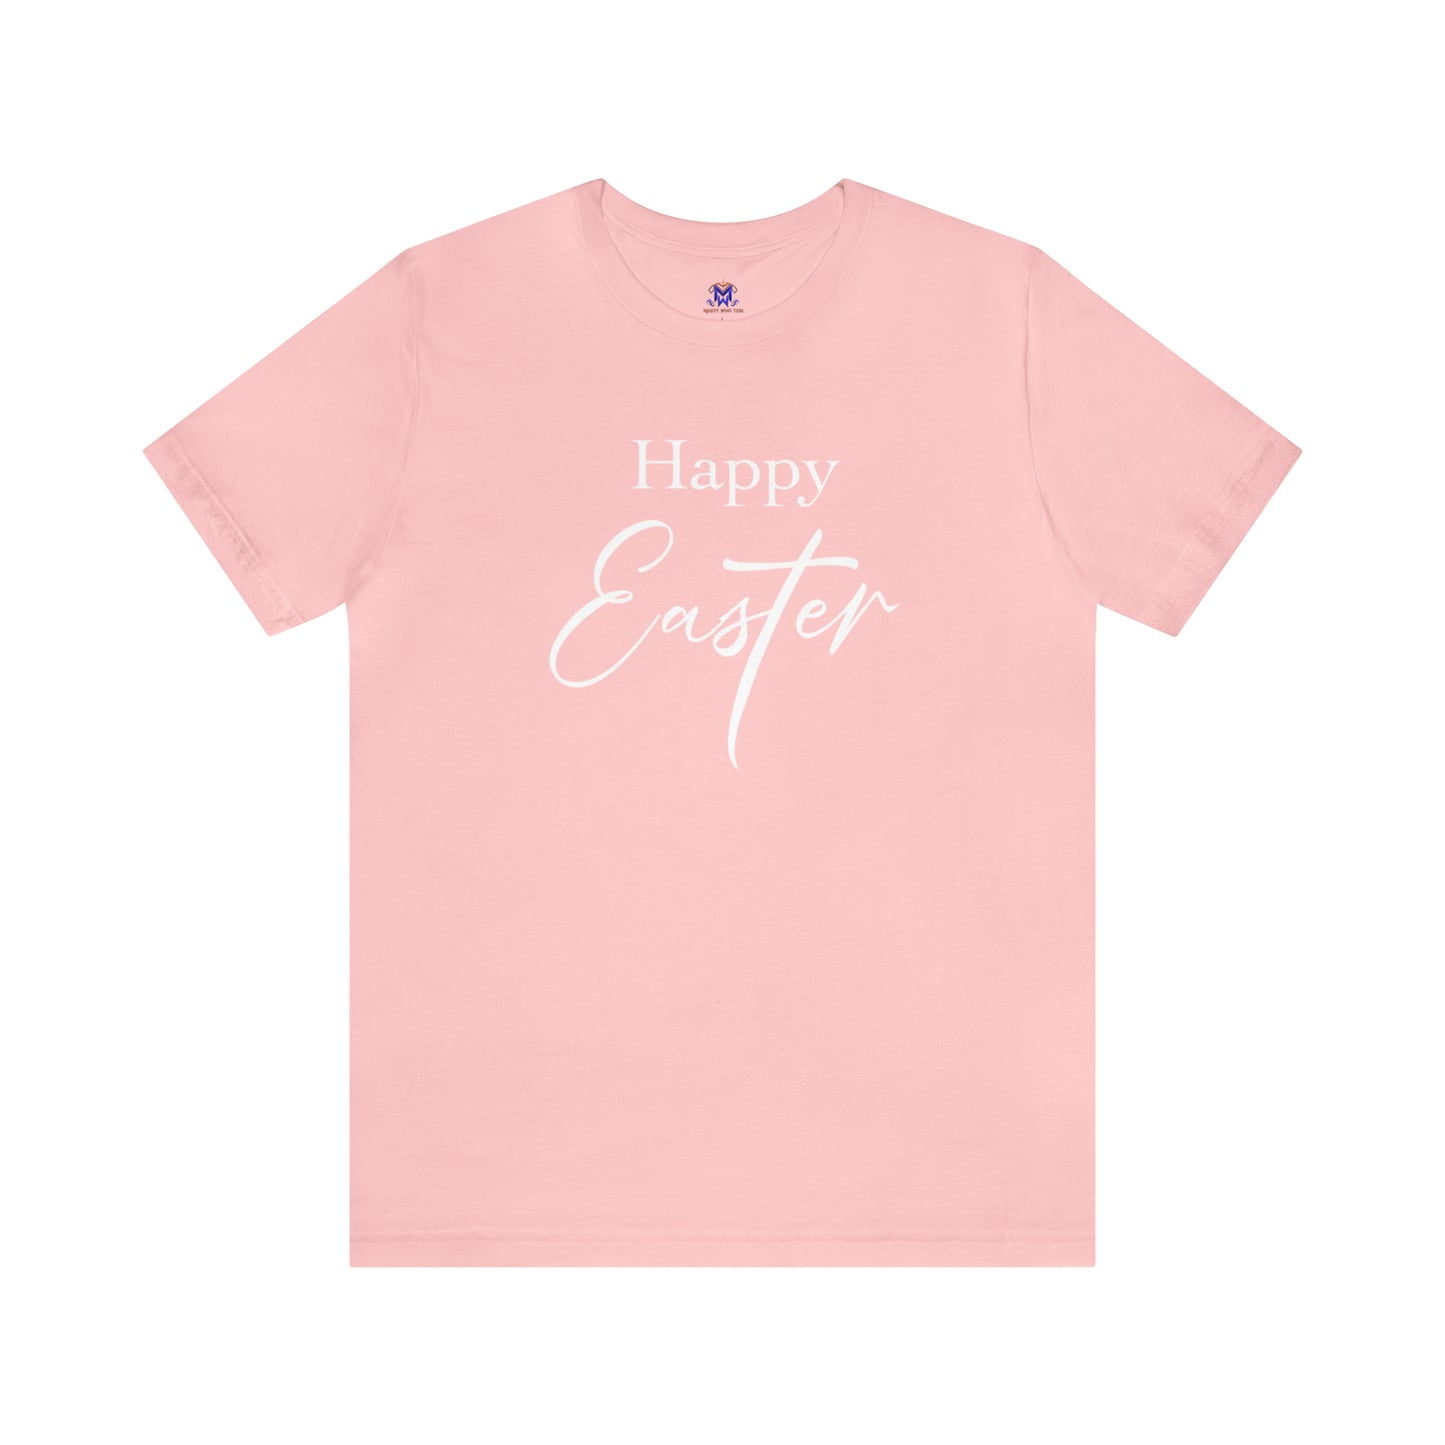 Happy Easter ( Available in more colors)